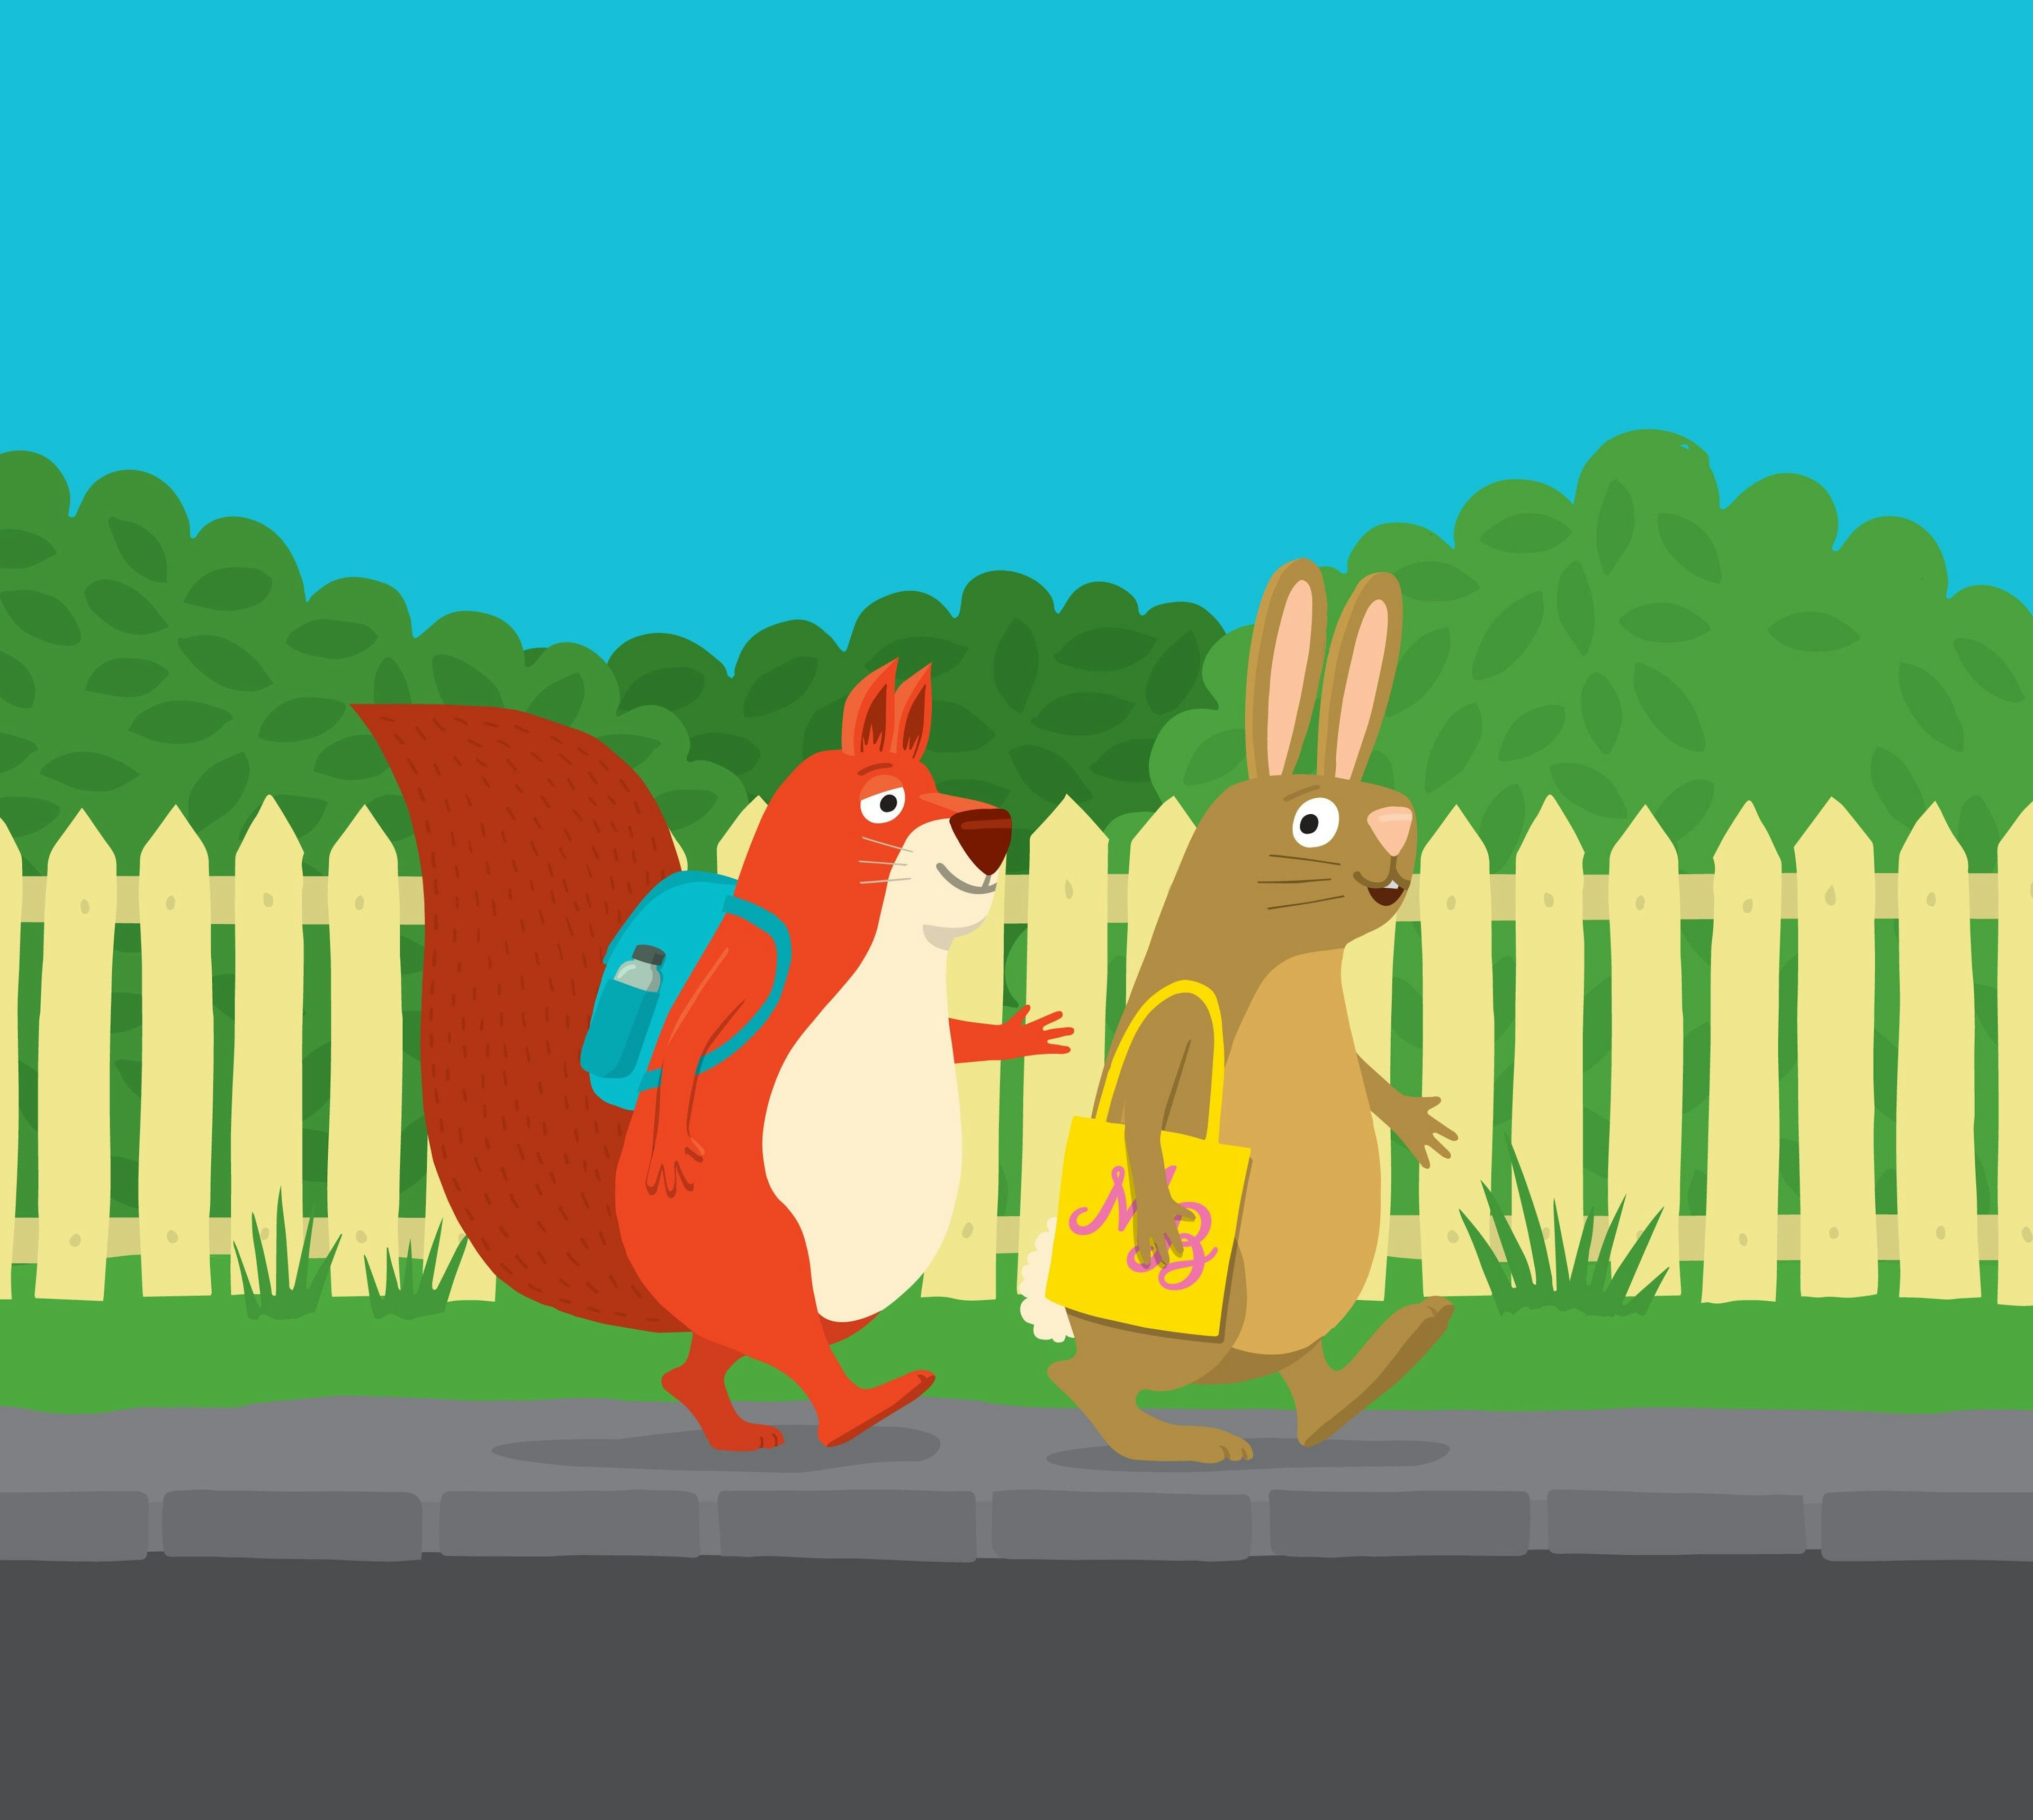 Illustration of a squirrel with a backpack and a bunny with a shopping bag walking down the street.